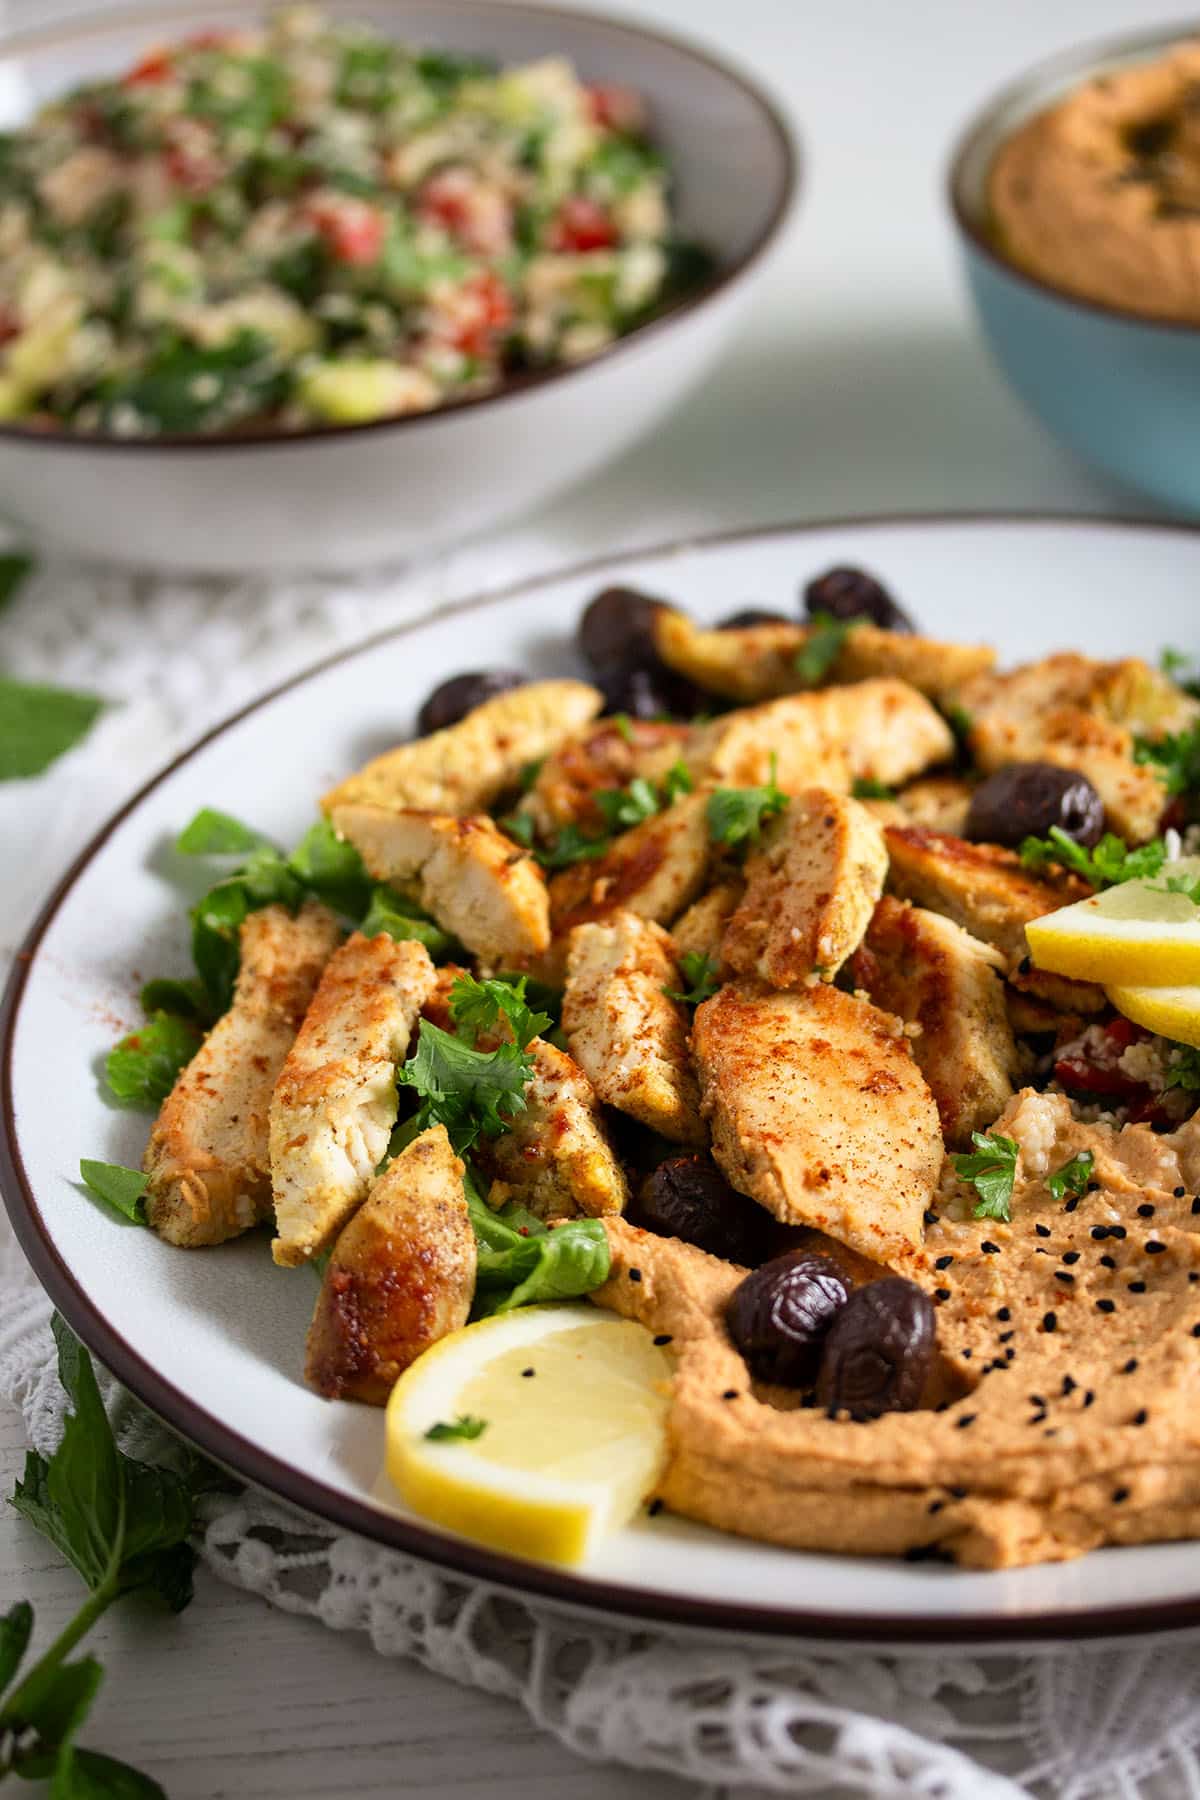 golden chicken breast pieces served with hummus, olives and lemon with a bowl of tabbouleh behind it.